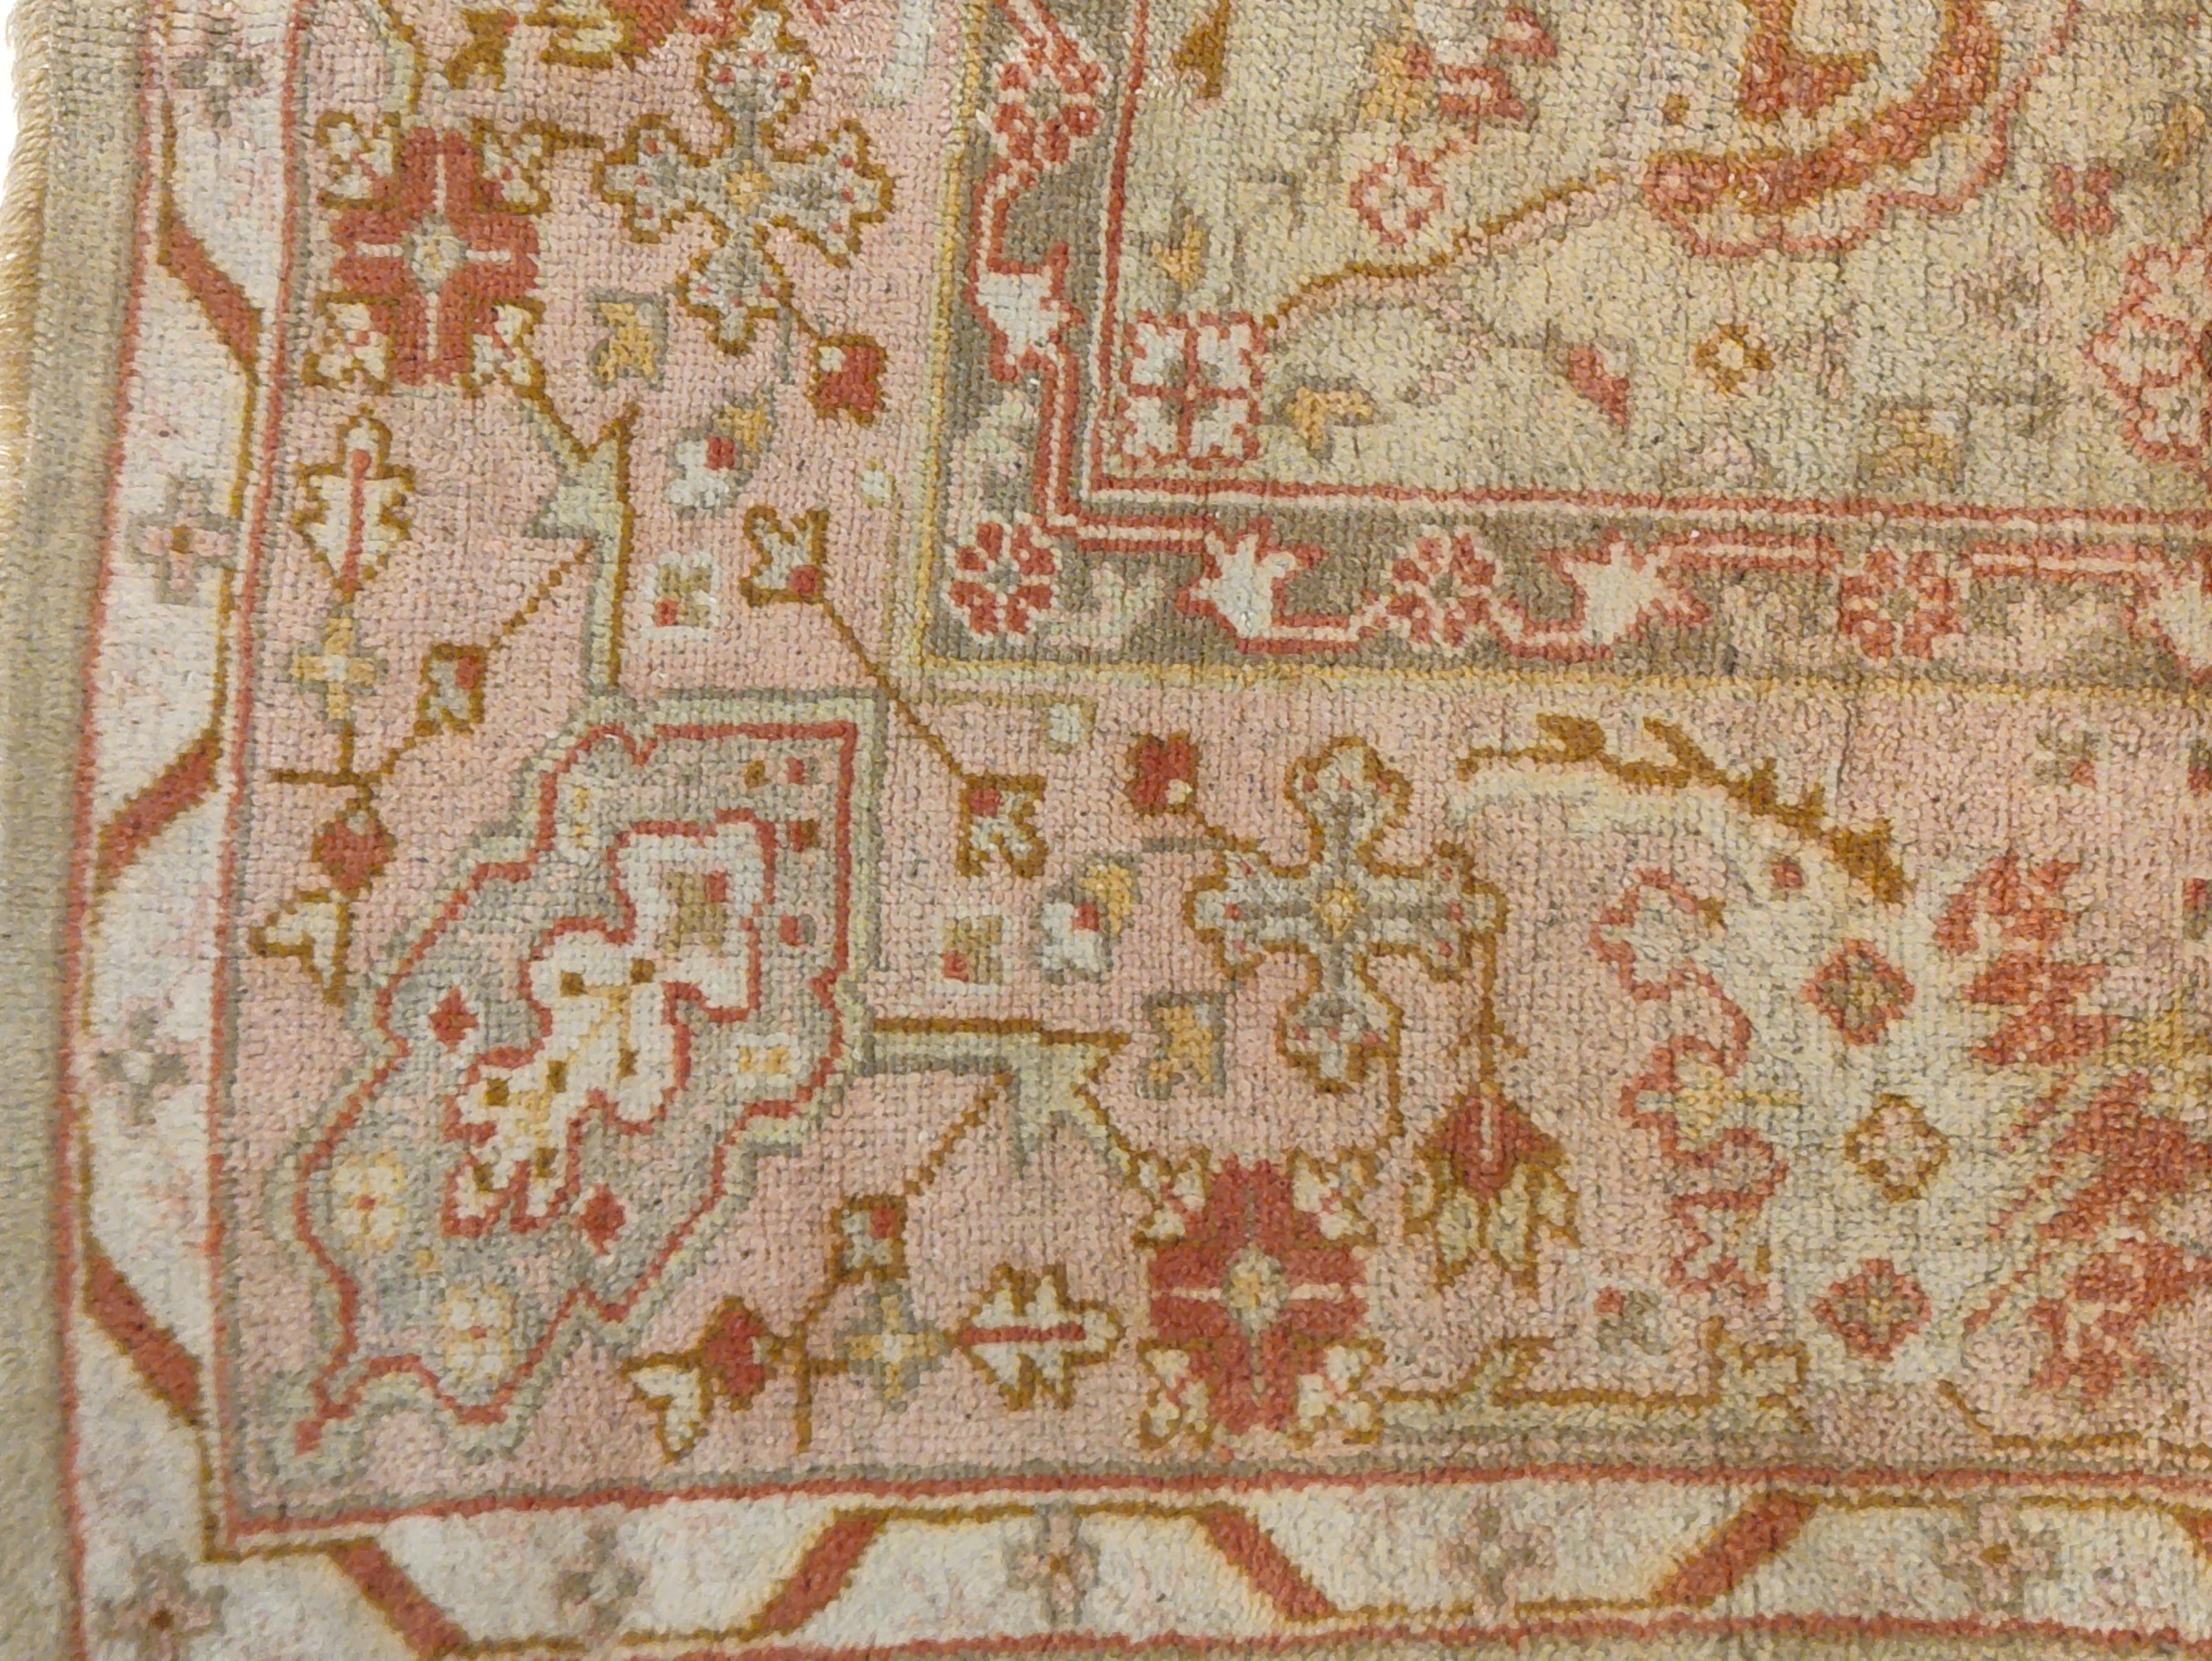 Antique Oushak carpets are heirs of a very long standing tradition. As rugs of this type were woven in western Anatolia since the Golden Age of the Ottoman empire in the 16th century. Originally referred to in the trade as 'Turkey' carpets, these